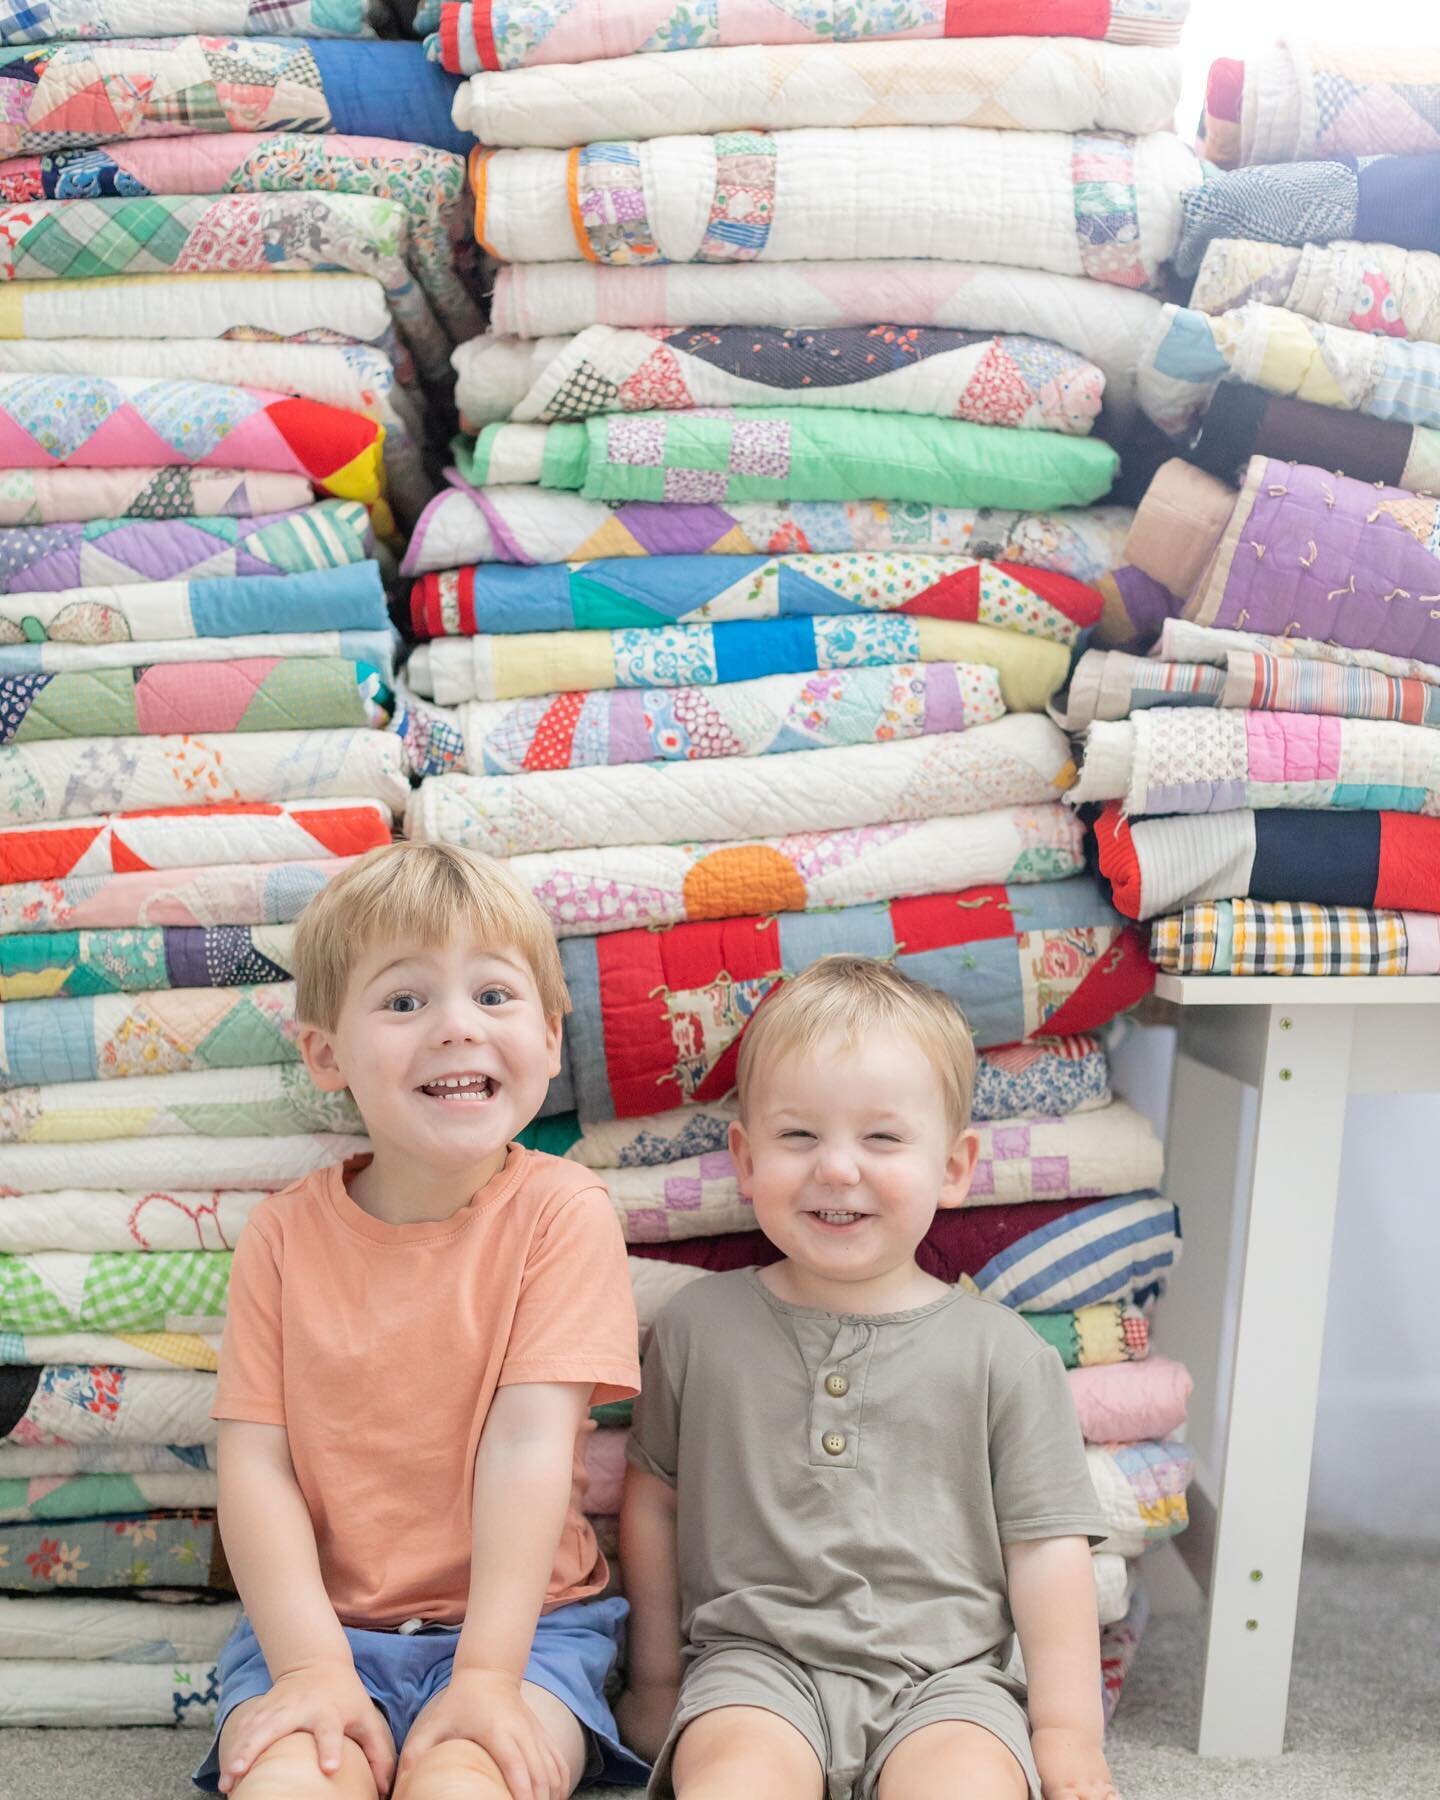 This week&rsquo;s SEVENTY quilts will be available to purchase at 8pm CT when the cart is activated! Also, swipe to see a real life photo with three kids under four. Jump over to the website to preview them all now!
PSA: all quilts are one-of-a-kind 